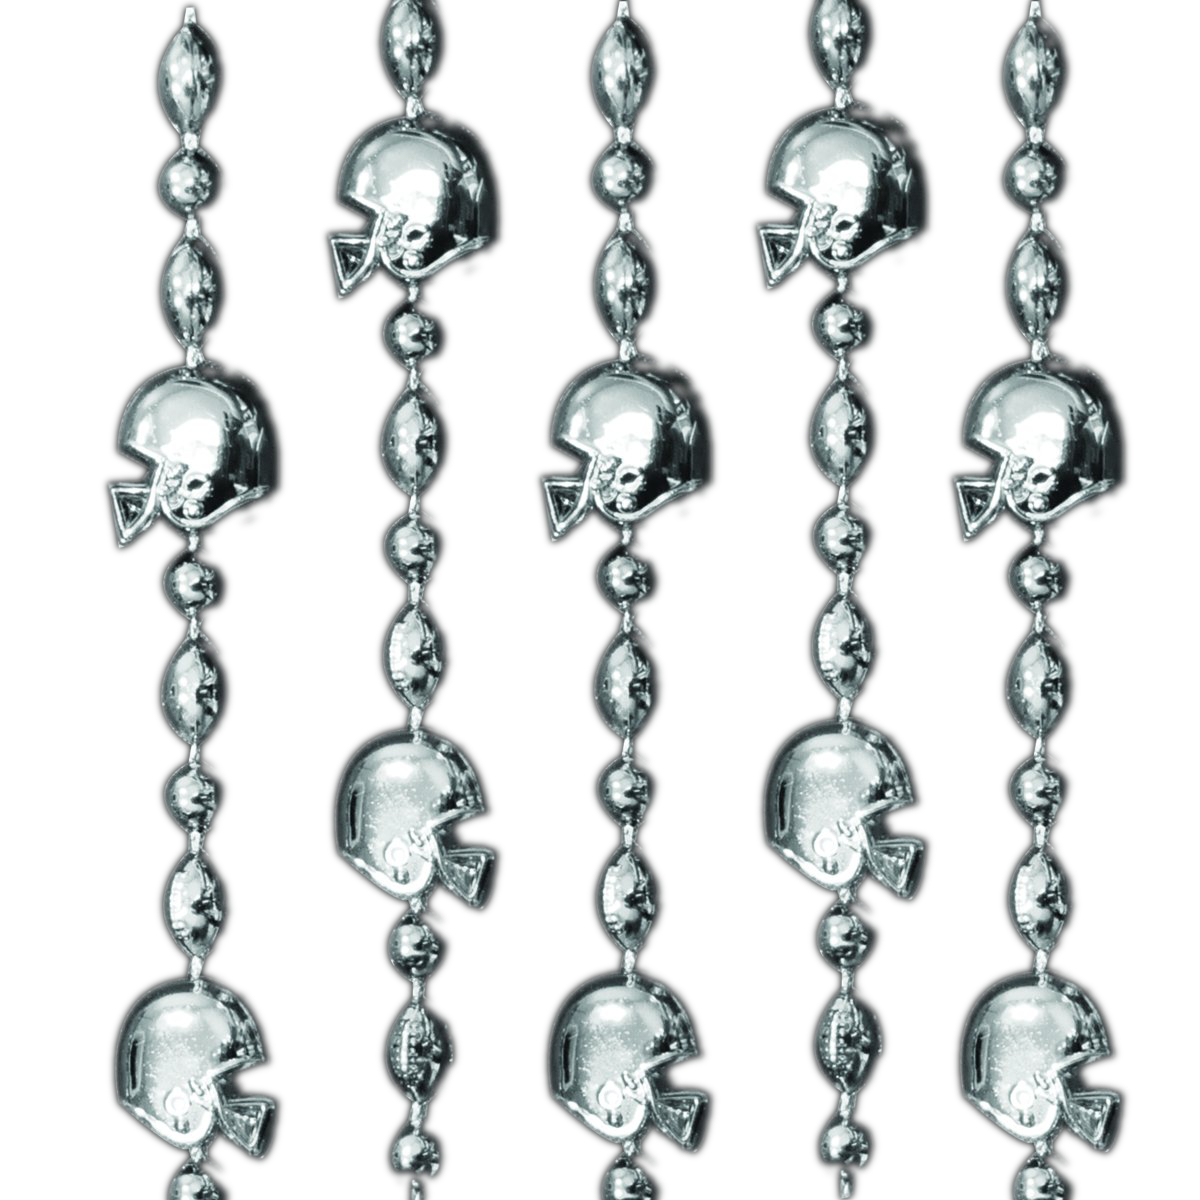 Football Helmet Bead Necklaces Silver Pack of 12 